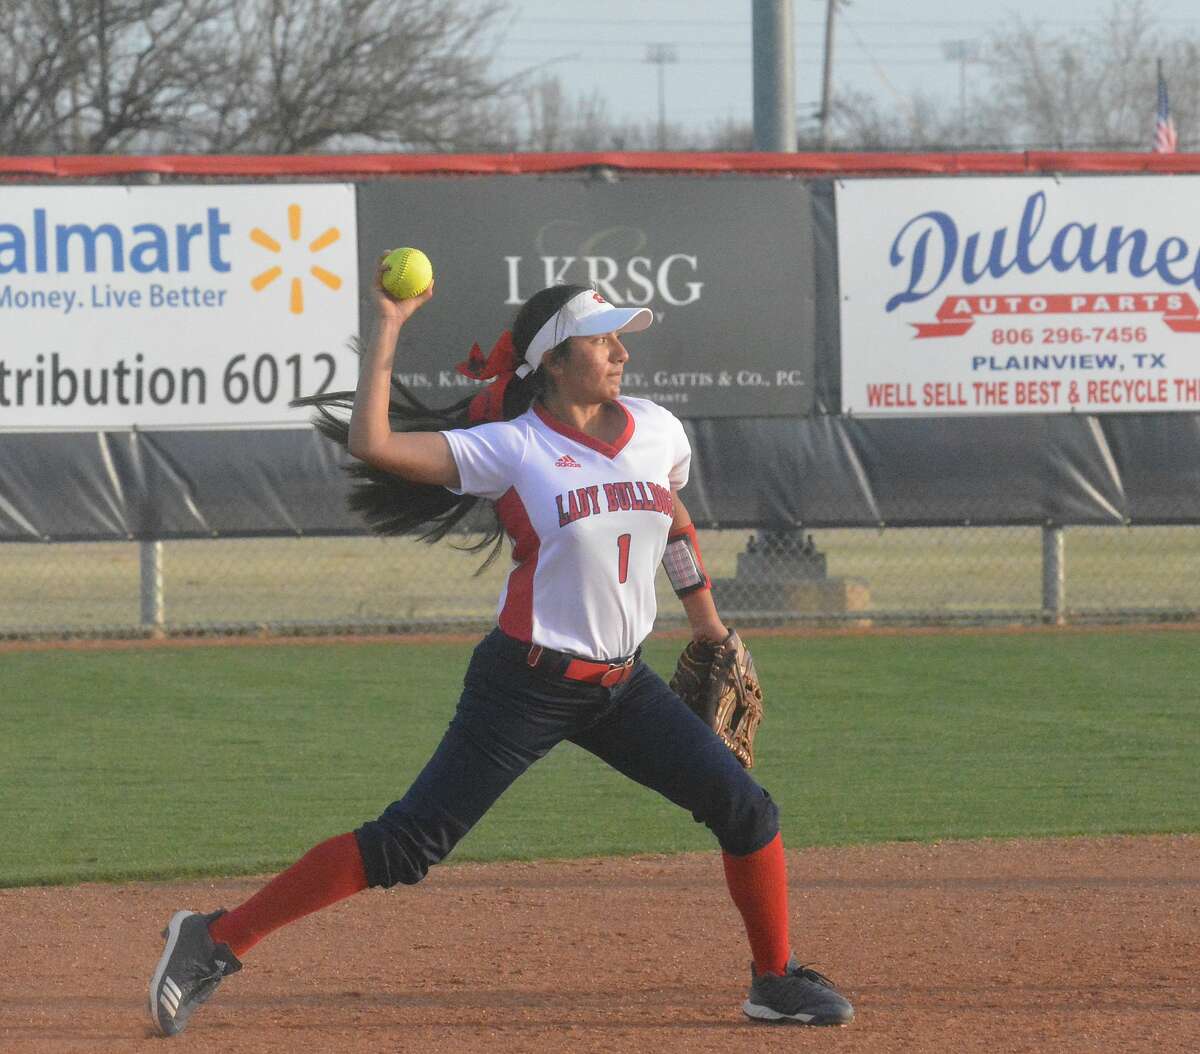 The Coronado Lady Mustangs powered a 12-run sixth inning to beat the Plainview Lady Bulldogs, 17-1, in six innings during District 3-5A action on Tuesday in Plainview.